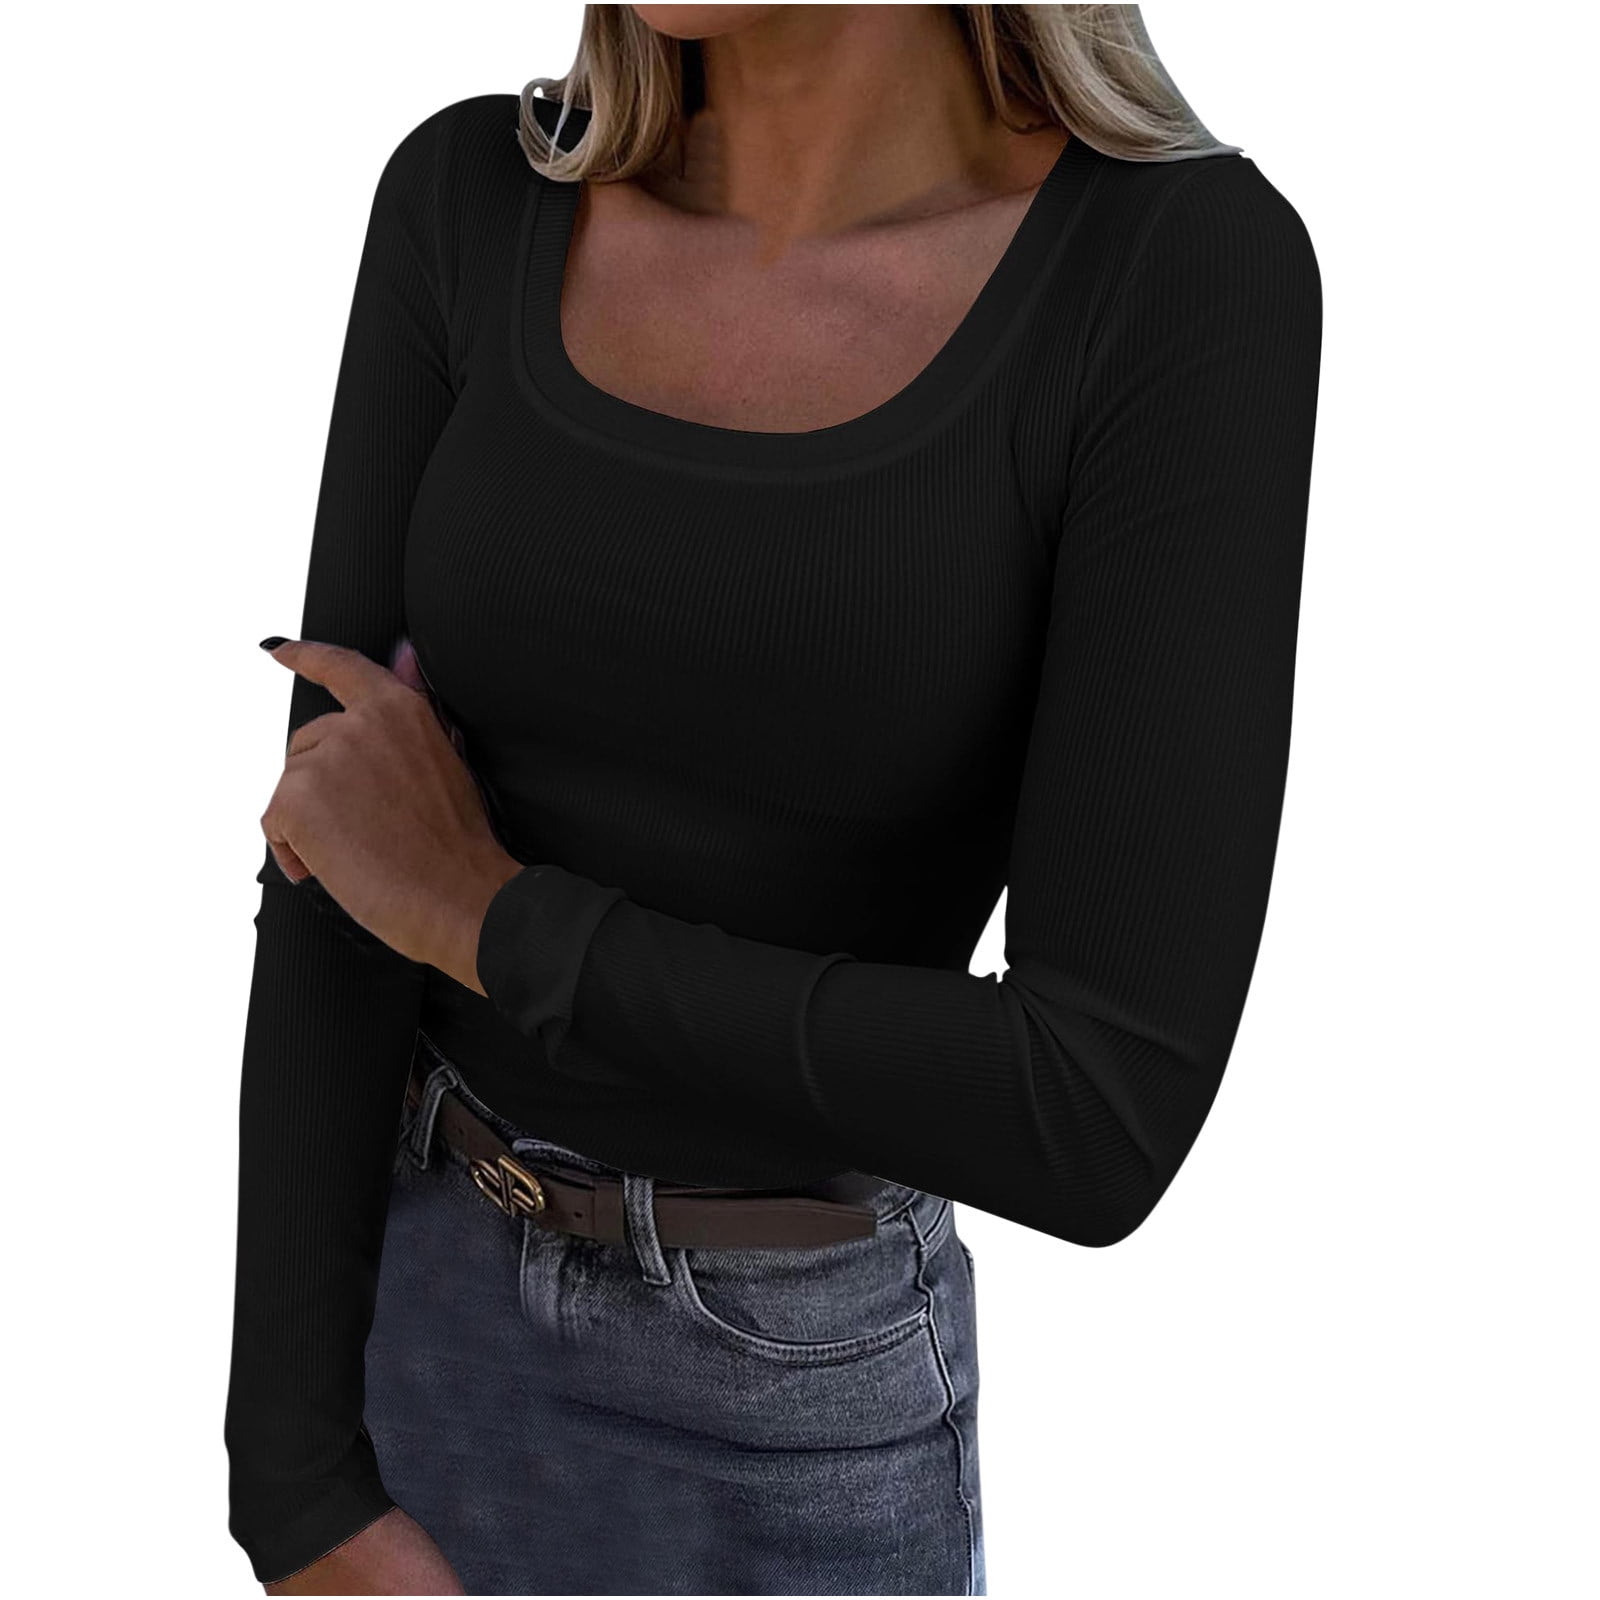 Plus Size Simple Thermal Underwear Top, Women's Plus Solid Long Sleeve High  Neck Medium Stretch Fitted Winter Top, Check Out Today's Deals Now